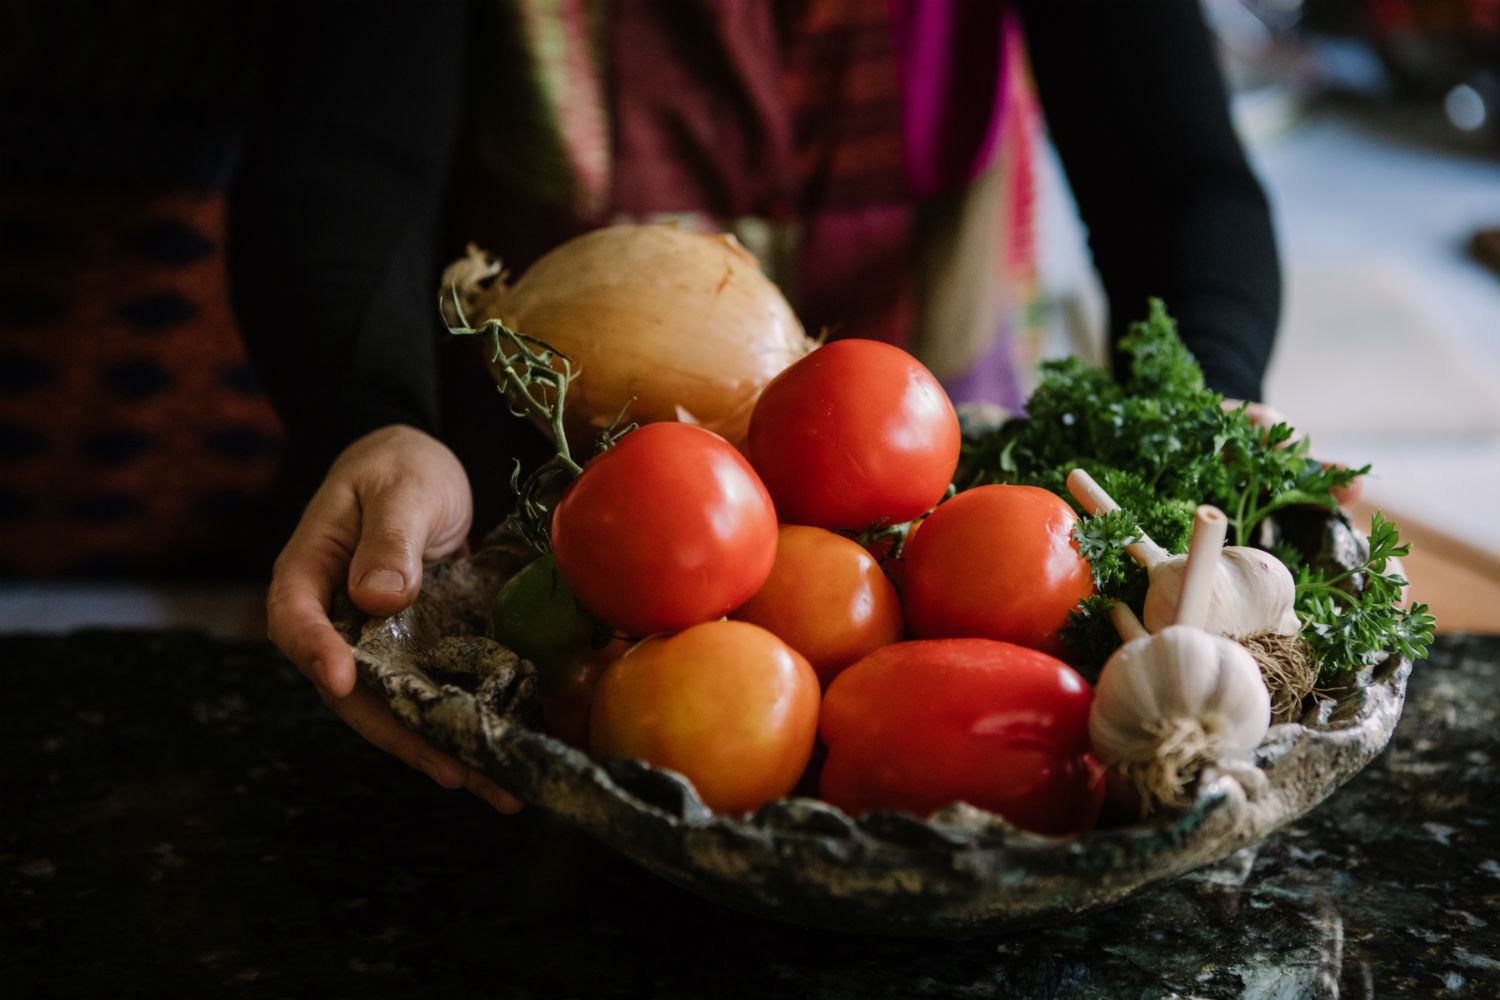 Bringing local produce to your kitchen